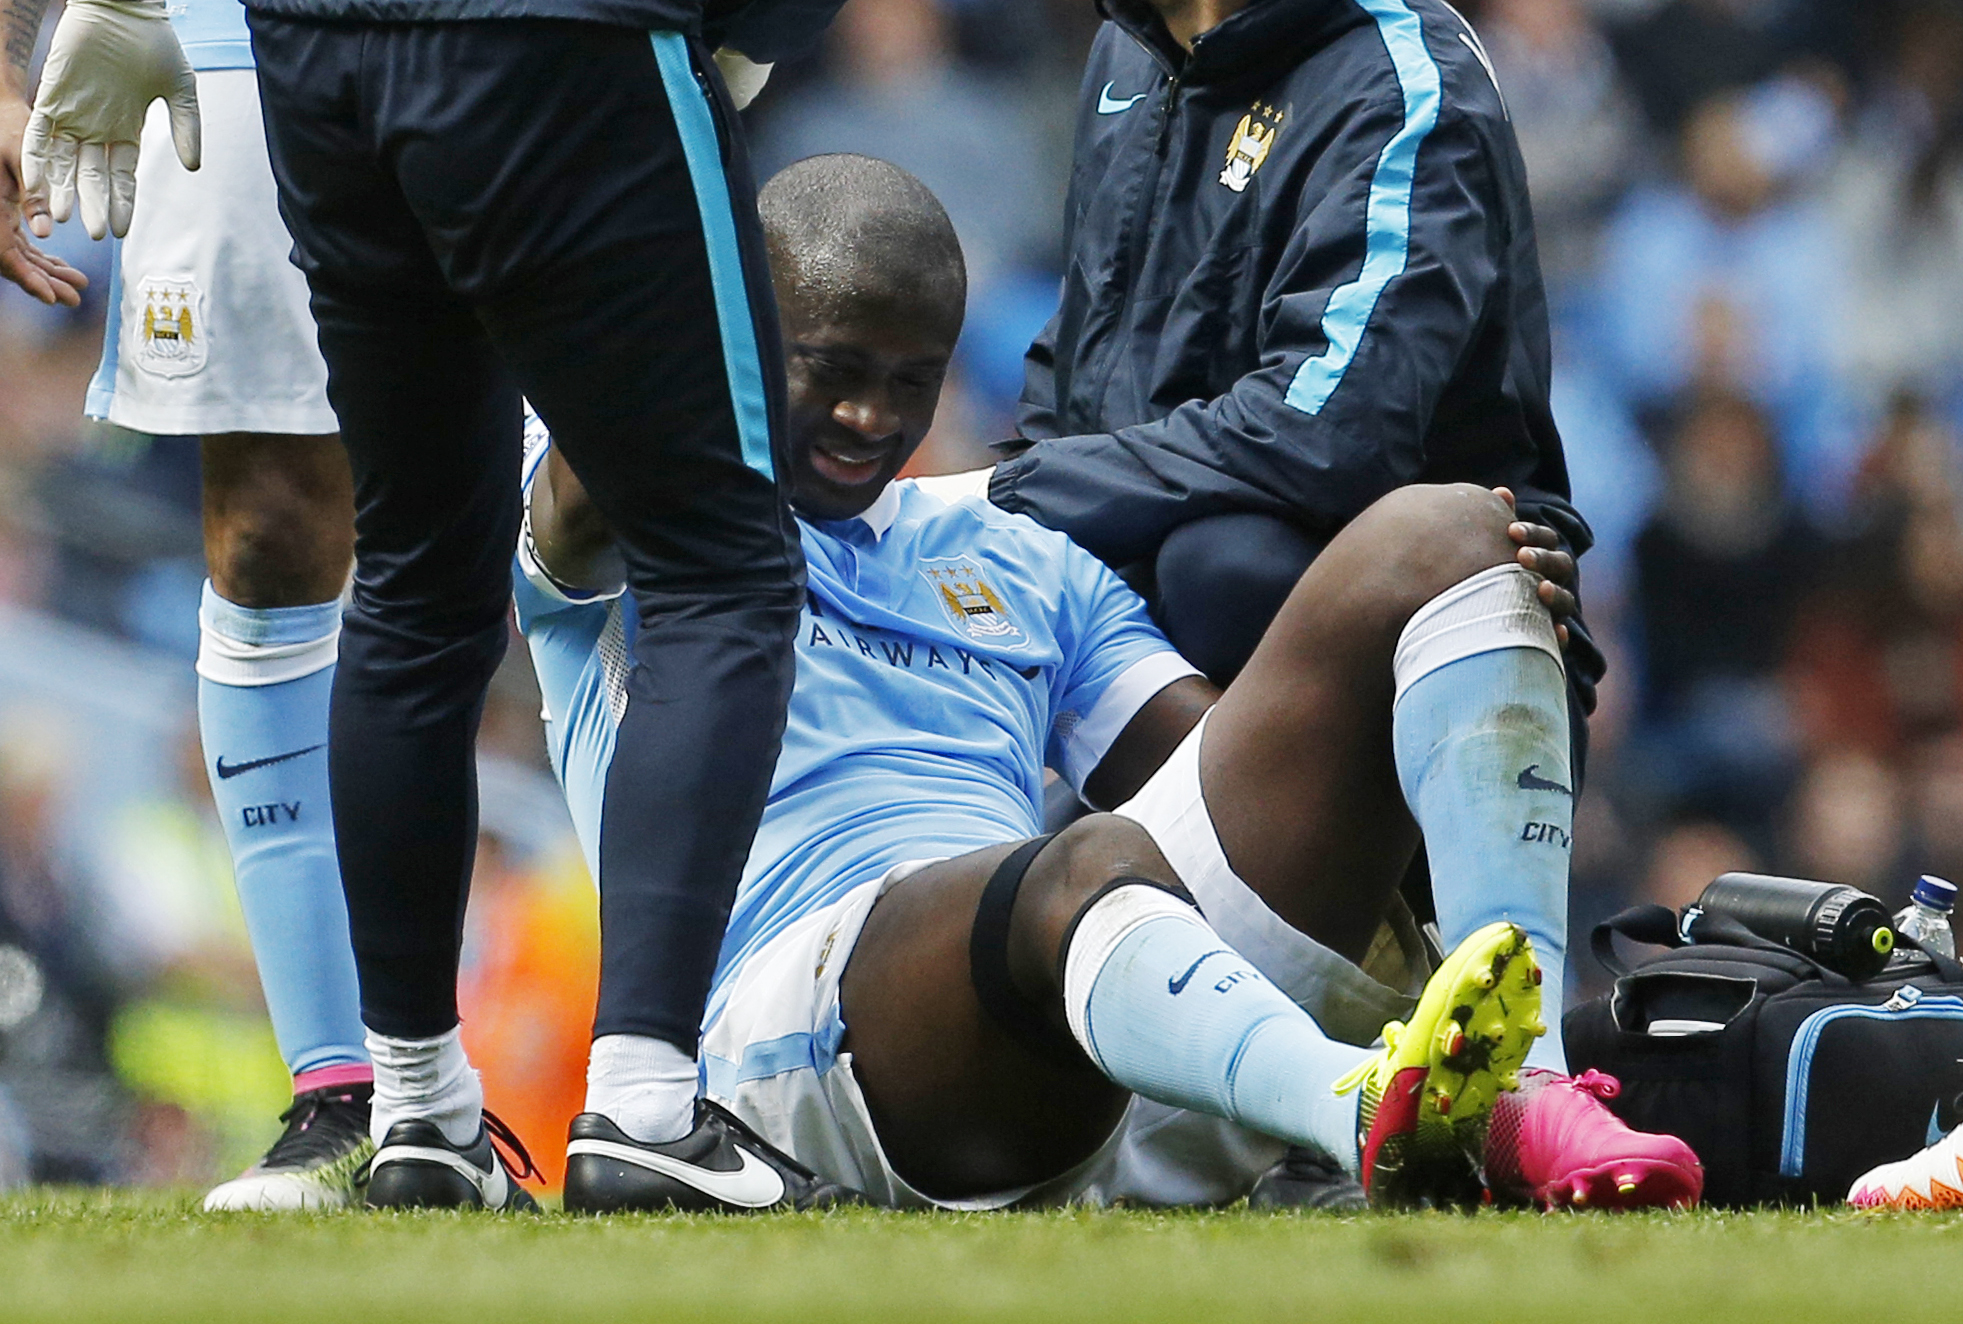 Manchester City's Toure ruled out of Champions League semis